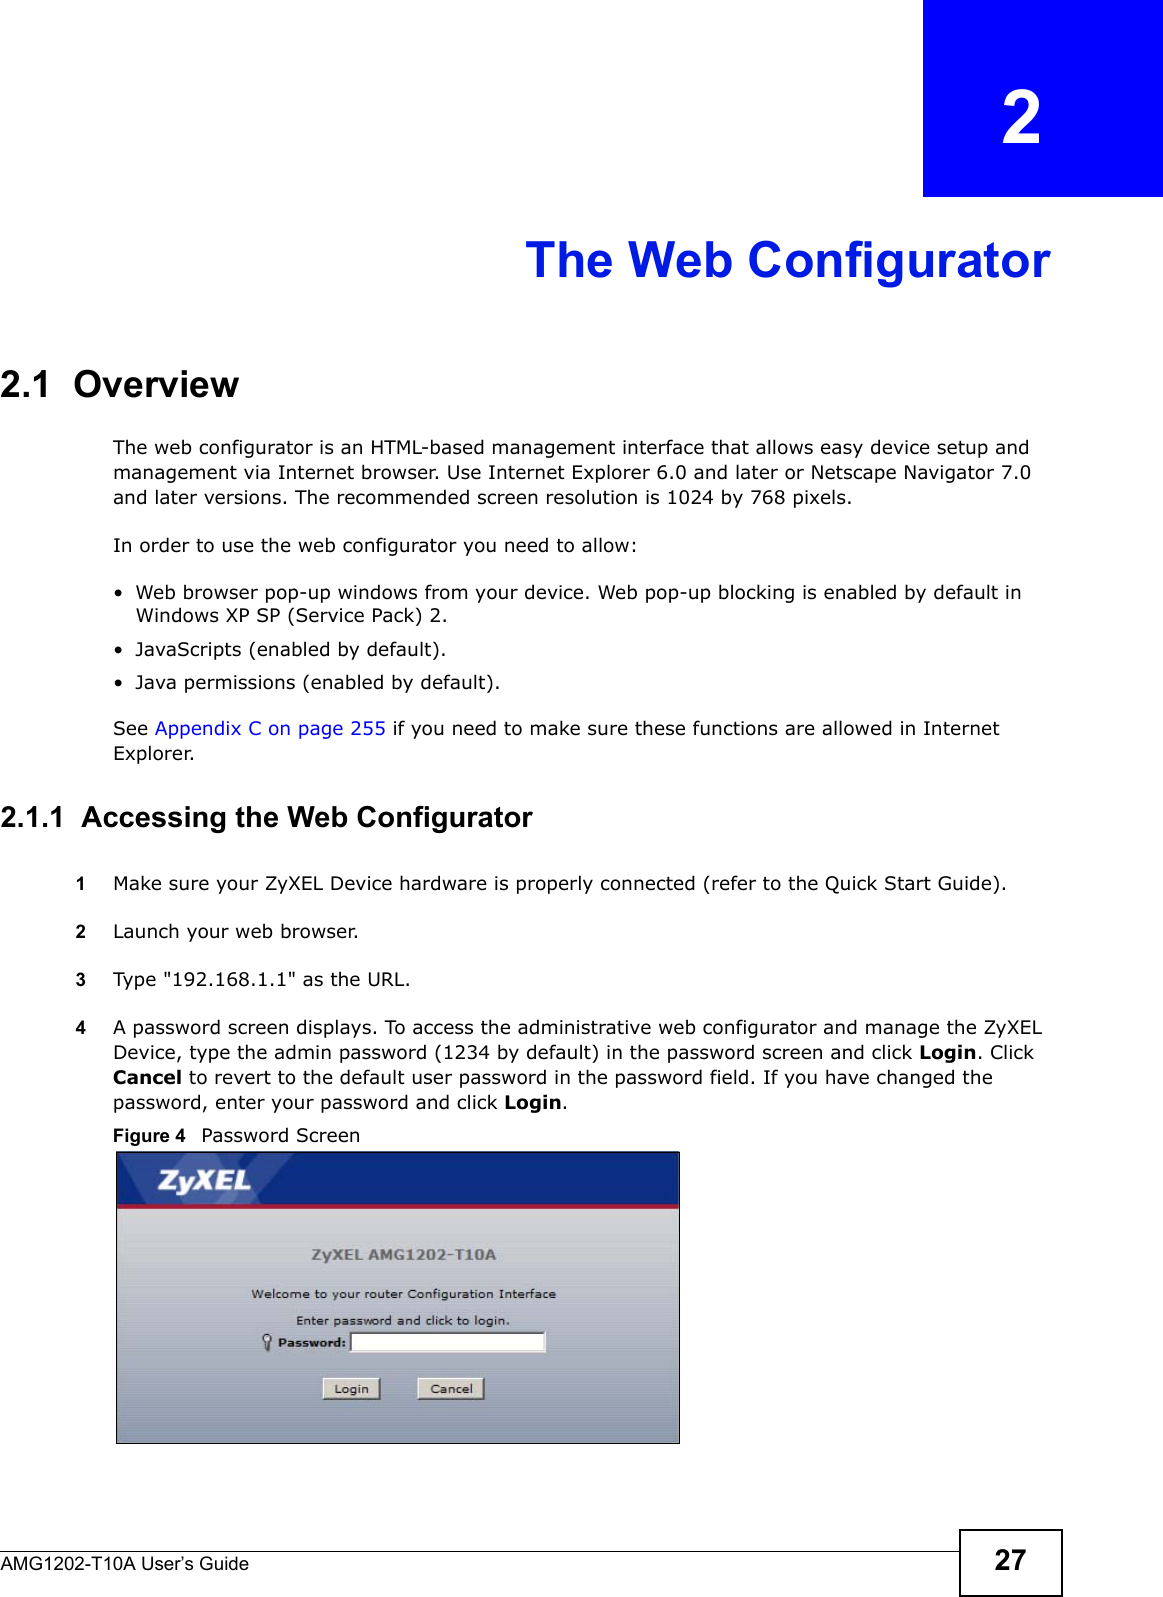 AMG1202-T10A User’s Guide 27CHAPTER   2The Web Configurator2.1  OverviewThe web configurator is an HTML-based management interface that allows easy device setup and management via Internet browser. Use Internet Explorer 6.0 and later or Netscape Navigator 7.0 and later versions. The recommended screen resolution is 1024 by 768 pixels.In order to use the web configurator you need to allow:• Web browser pop-up windows from your device. Web pop-up blocking is enabled by default in Windows XP SP (Service Pack) 2.• JavaScripts (enabled by default).• Java permissions (enabled by default).See Appendix C on page 255 if you need to make sure these functions are allowed in Internet Explorer.2.1.1  Accessing the Web Configurator1Make sure your ZyXEL Device hardware is properly connected (refer to the Quick Start Guide).2Launch your web browser.3Type &quot;192.168.1.1&quot; as the URL.4A password screen displays. To access the administrative web configurator and manage the ZyXEL Device, type the admin password (1234 by default) in the password screen and click Login. Click Cancel to revert to the default user password in the password field. If you have changed the password, enter your password and click Login.Figure 4   Password Screen